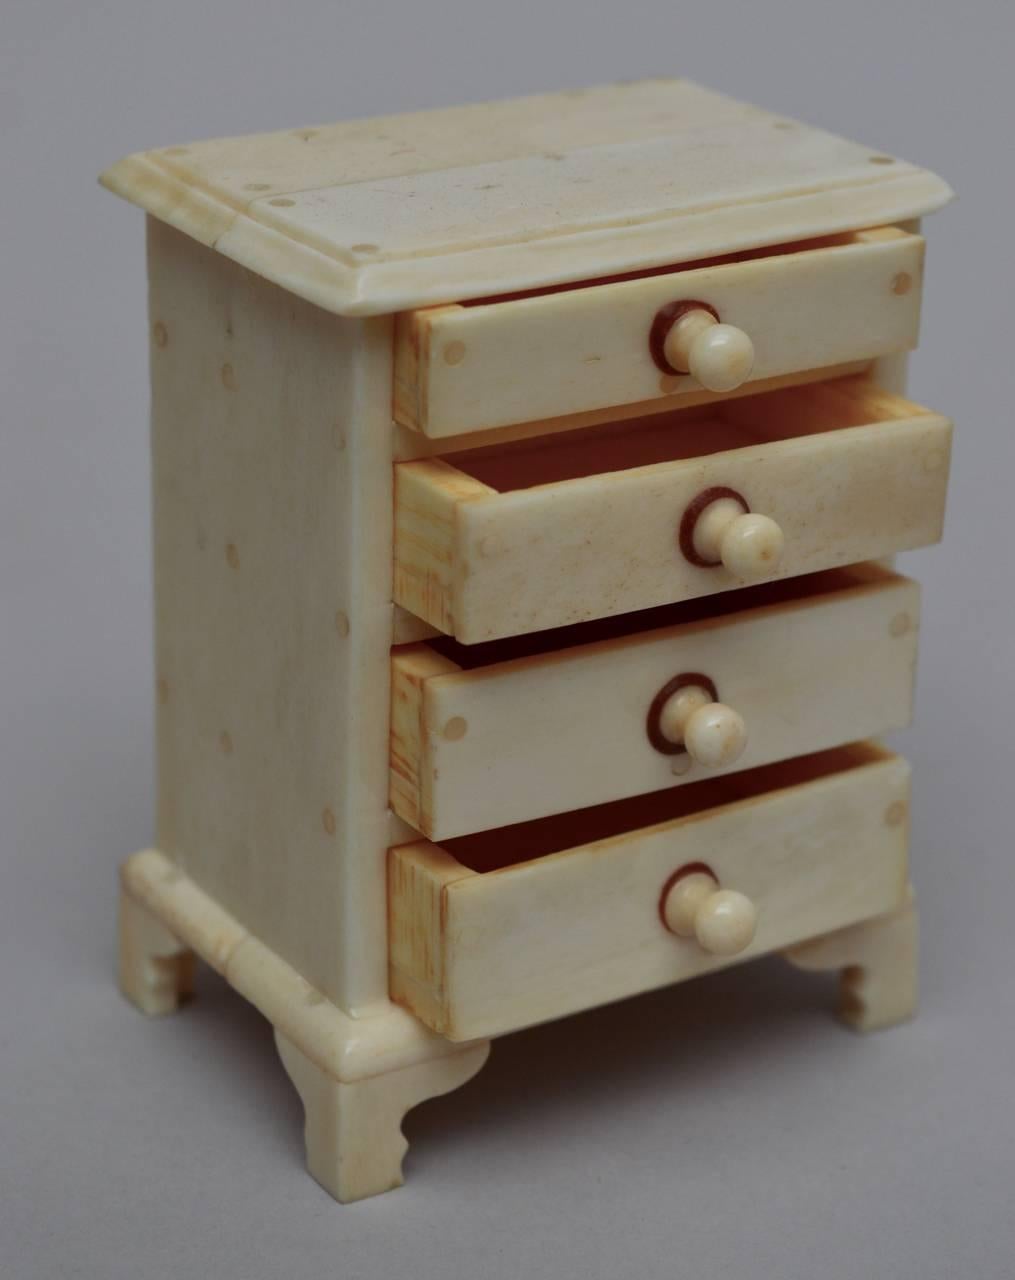 Rare Anglo-Indian miniature carved bone chest of drawers. Beautifully constructed by the artisans of Vizagapatam with tiny bone pegs and working drawers. Circa 1890-1900